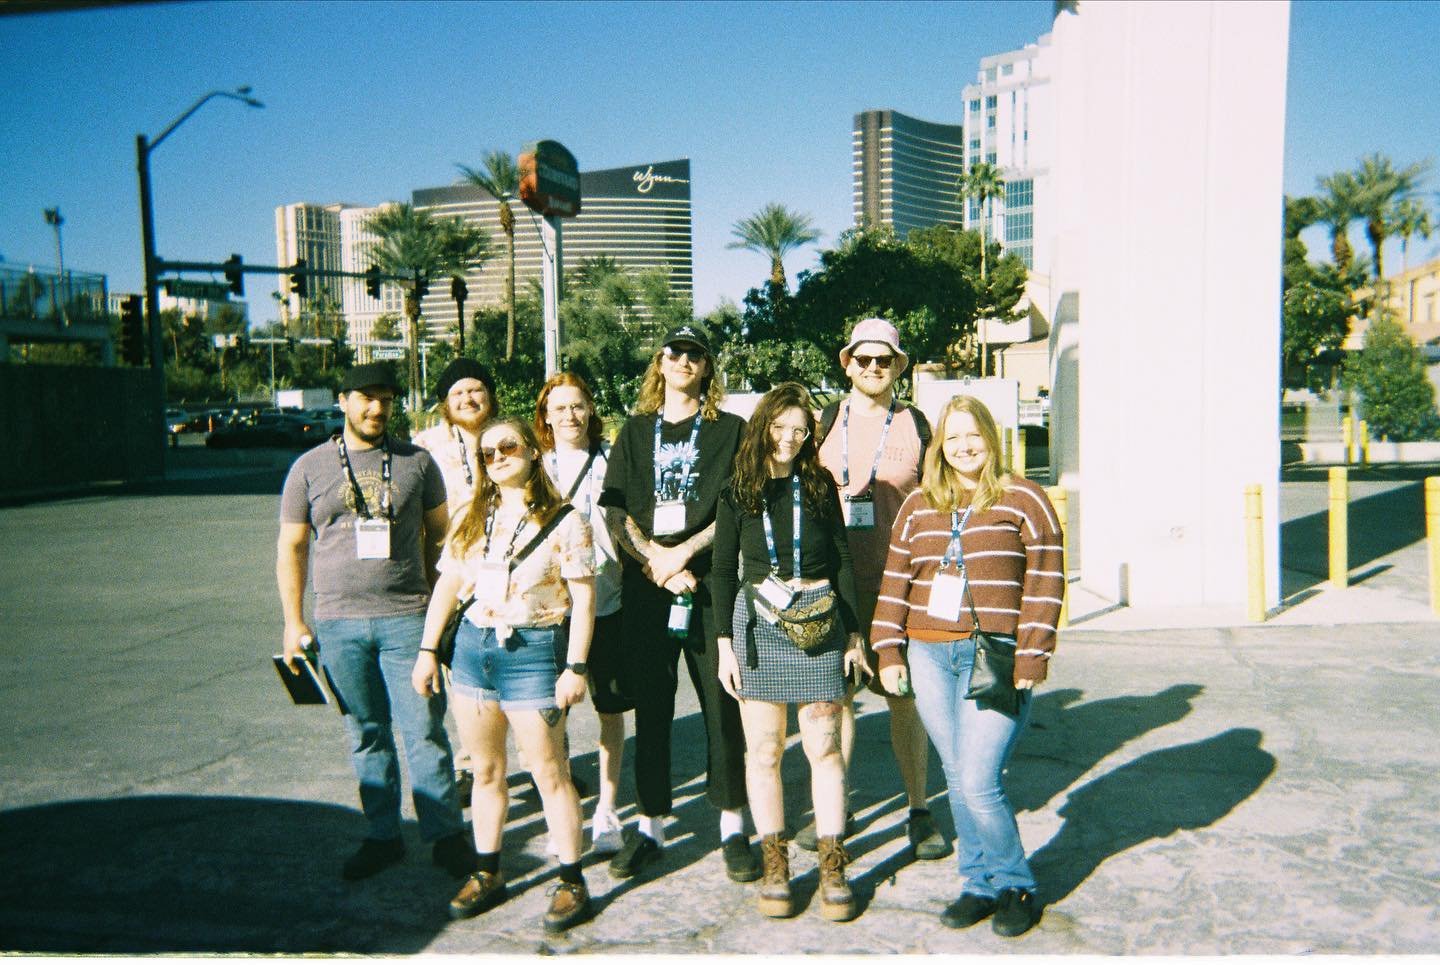 The Squad soaking up knowledge and sun-rays at the International Pizza Expo in Vegas (along with our friends from @the_owl_logan) 🤙🏼

🌞 🧠 ✅

📷: @bessiekinz